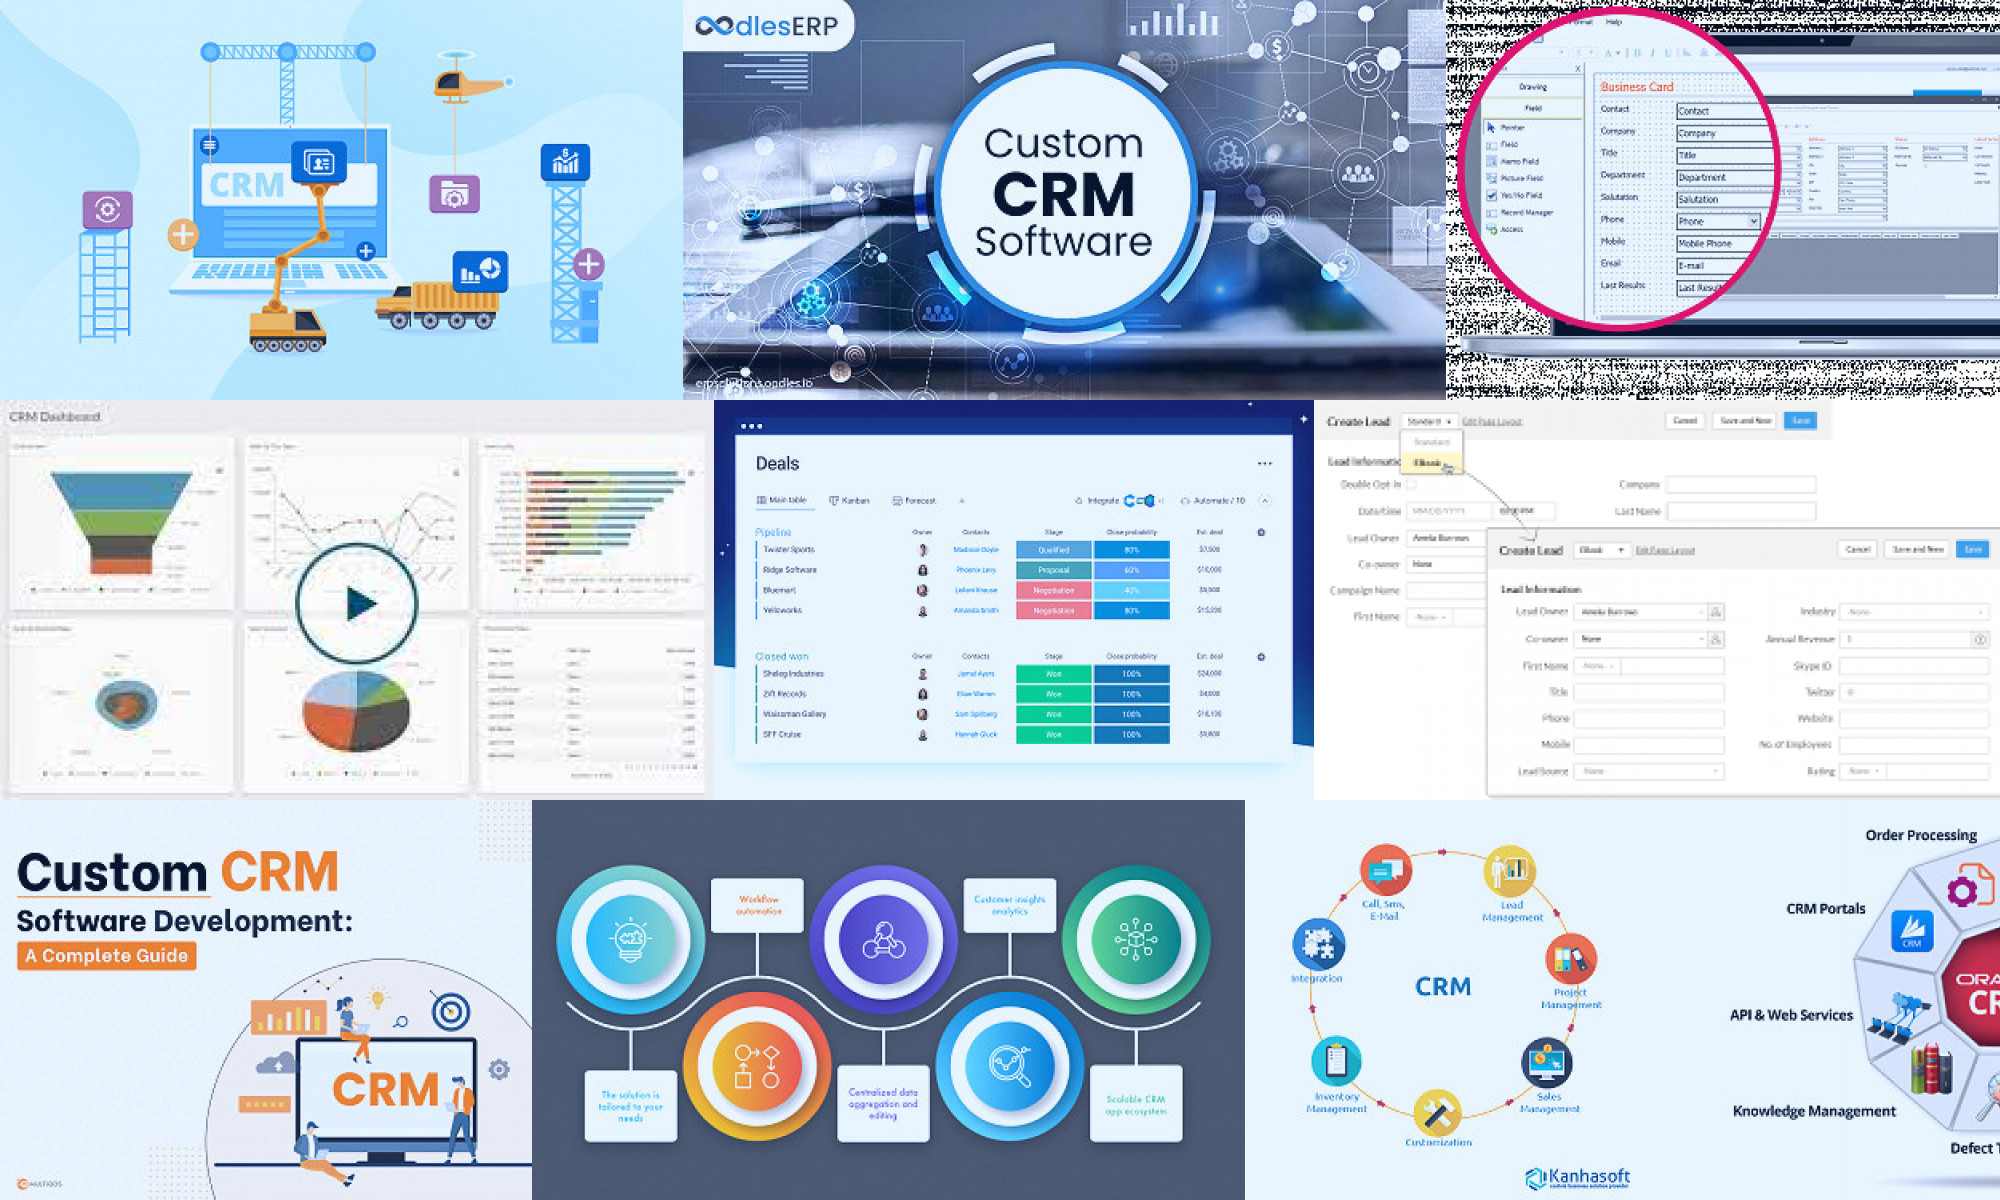 customized crm software